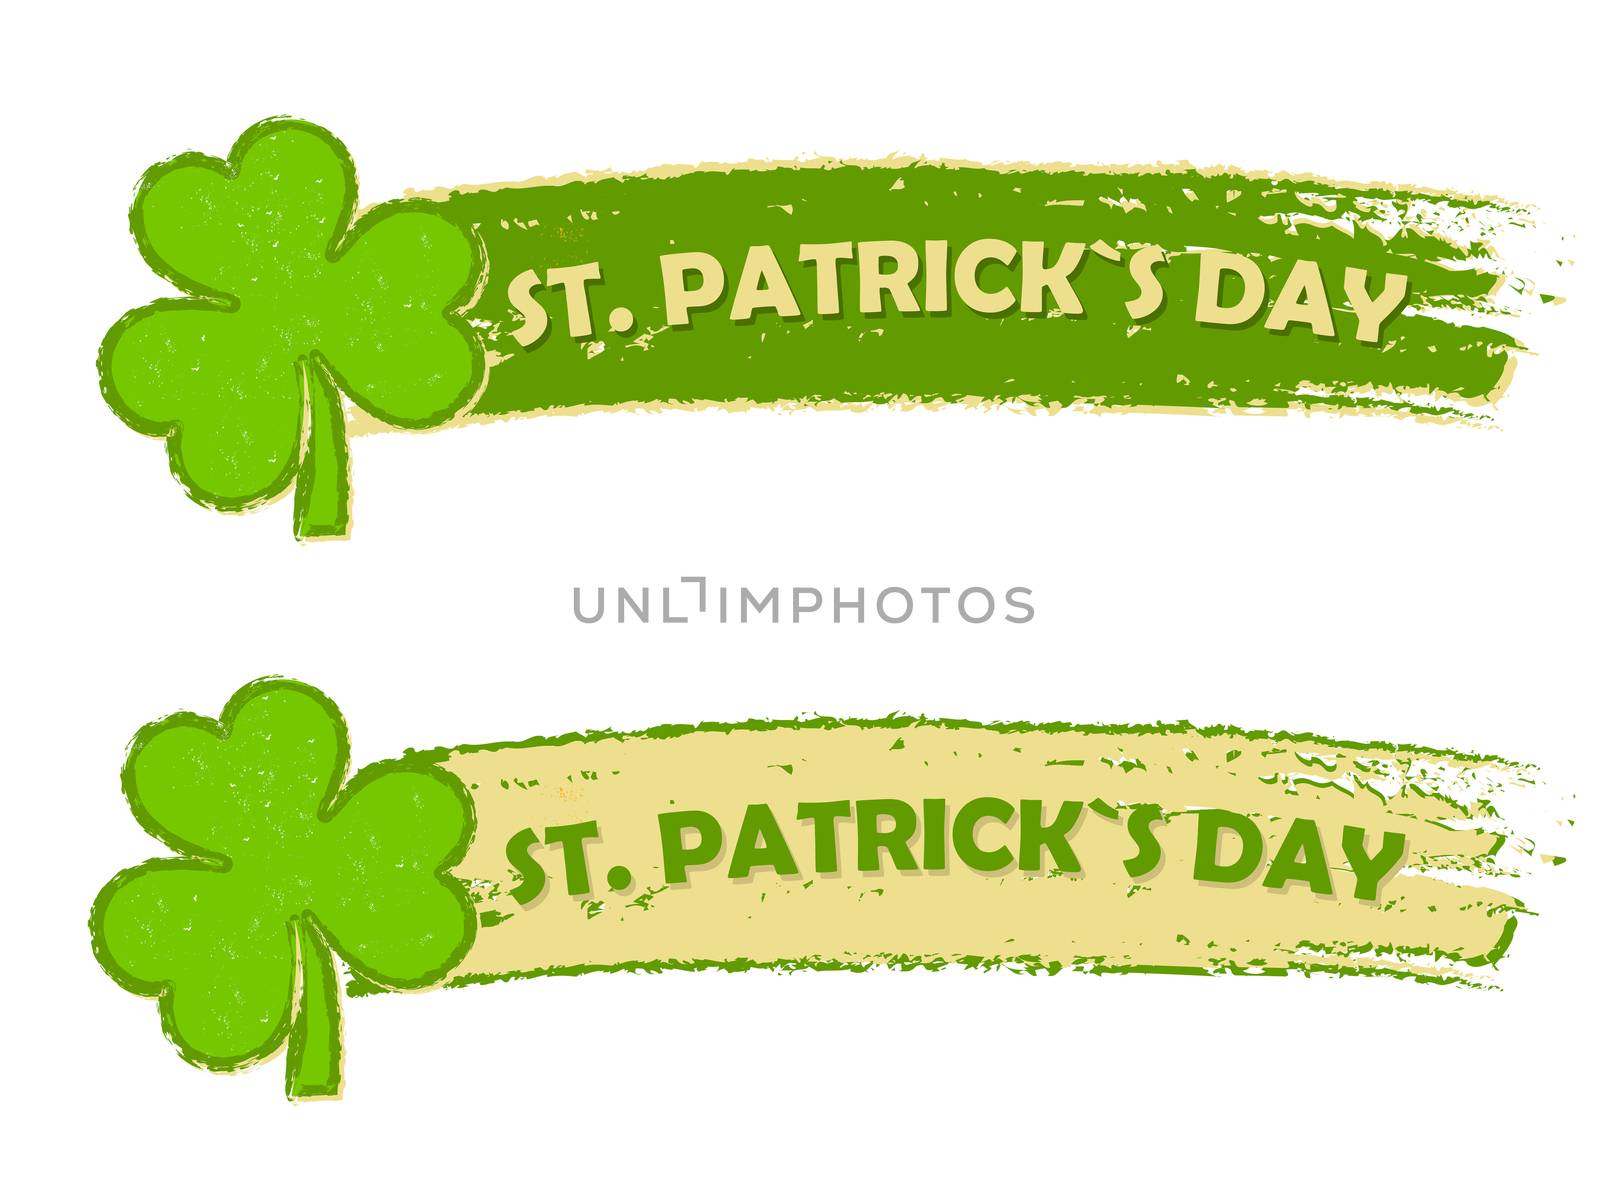 St. Patrick's day with shamrock signs, two green drawn banners by marinini